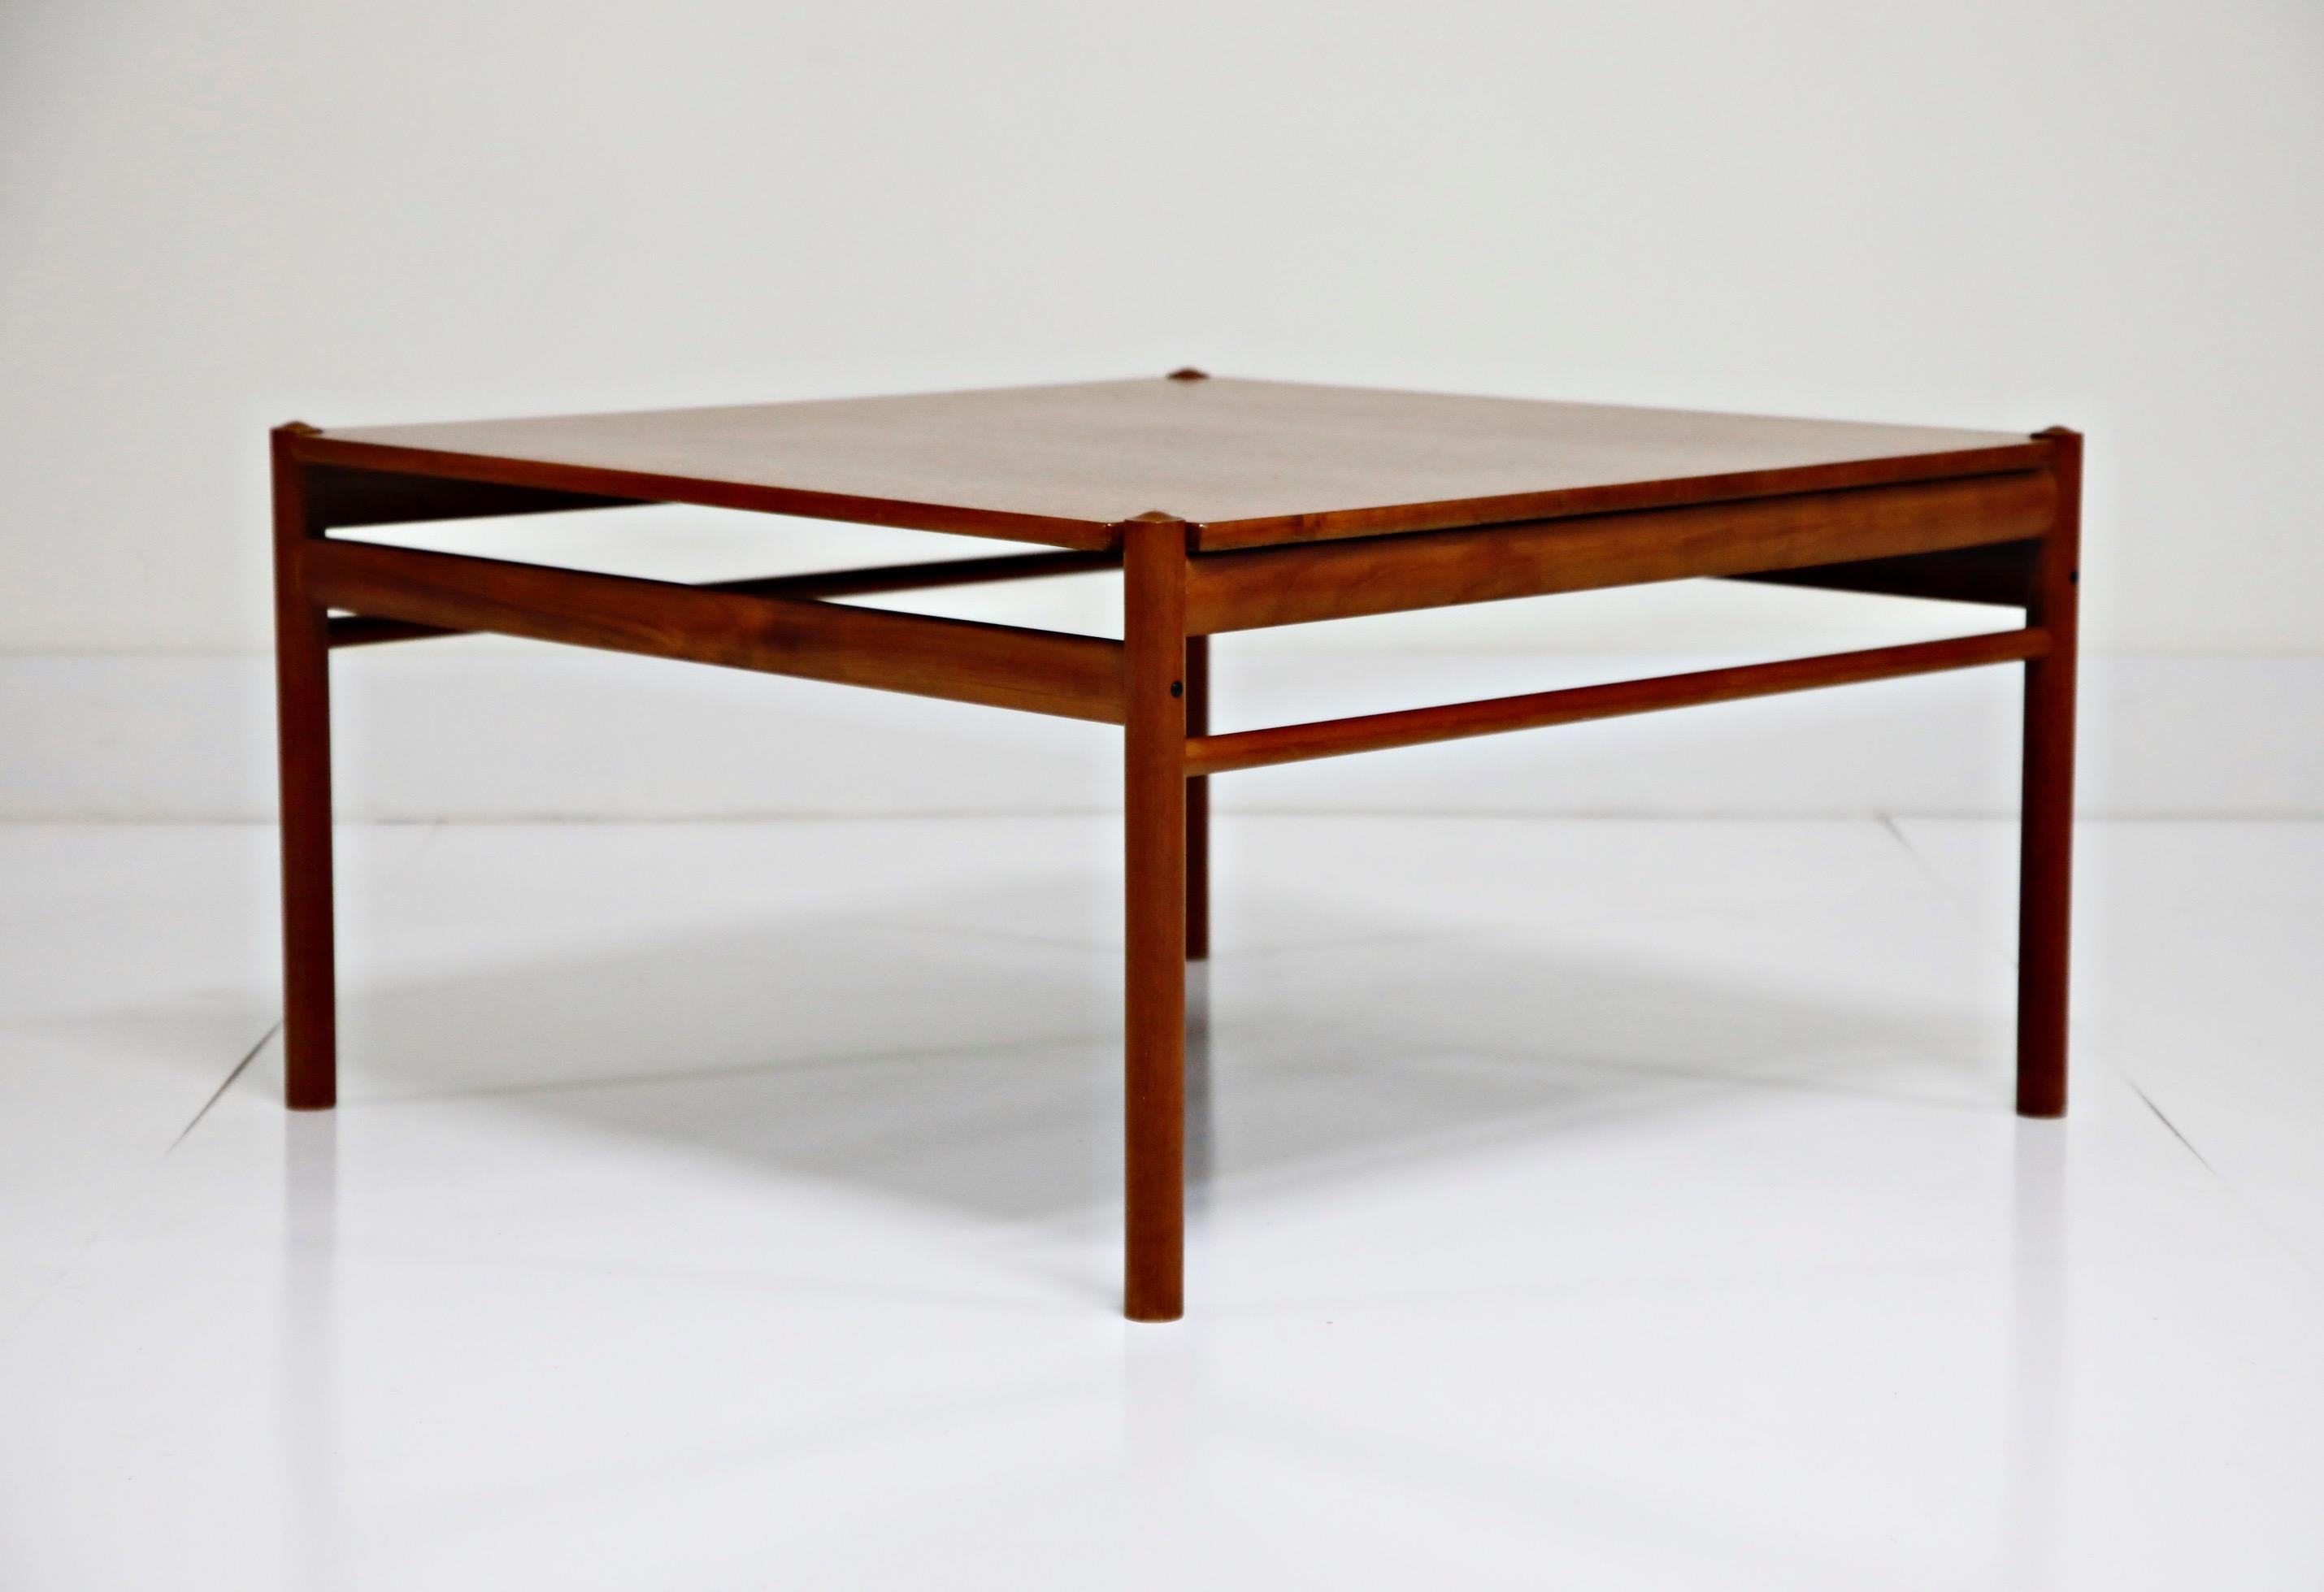 Mid-20th Century Reversible Teak & Formica Coffee Table by Ole Wanscher for Poul Jeppesen, Signed For Sale